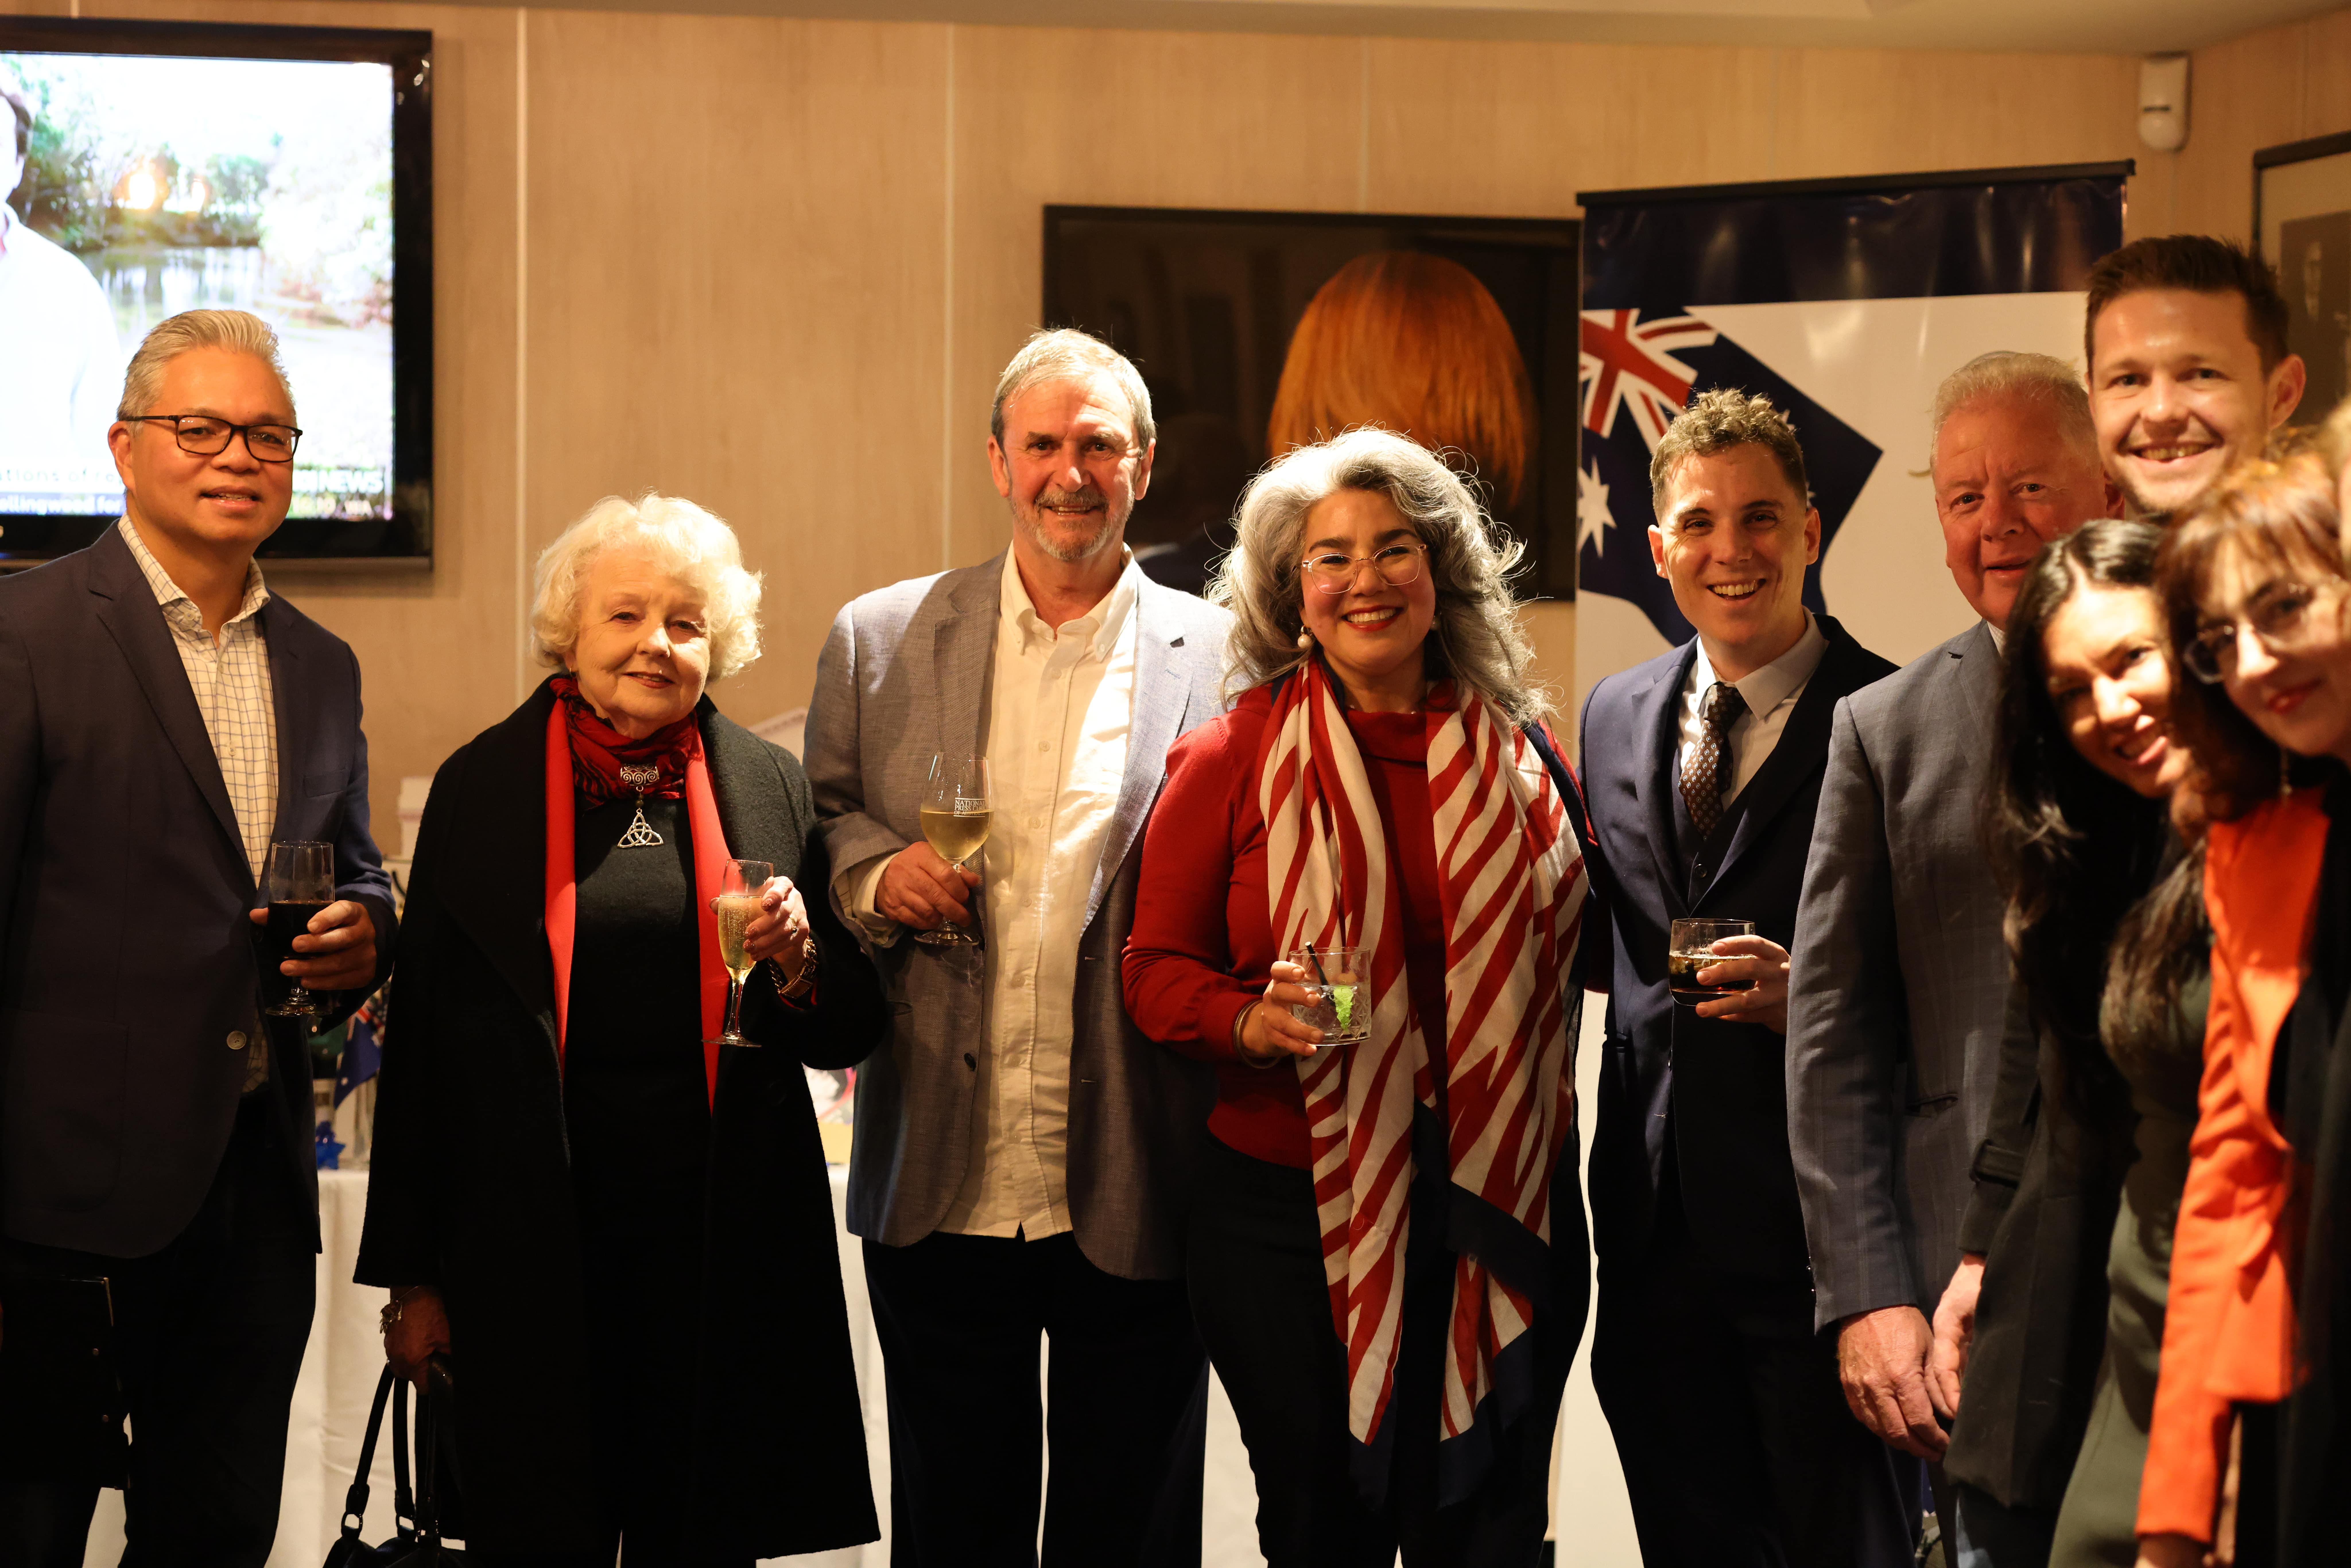 AAA hosts the Canberra Diplomatic Club